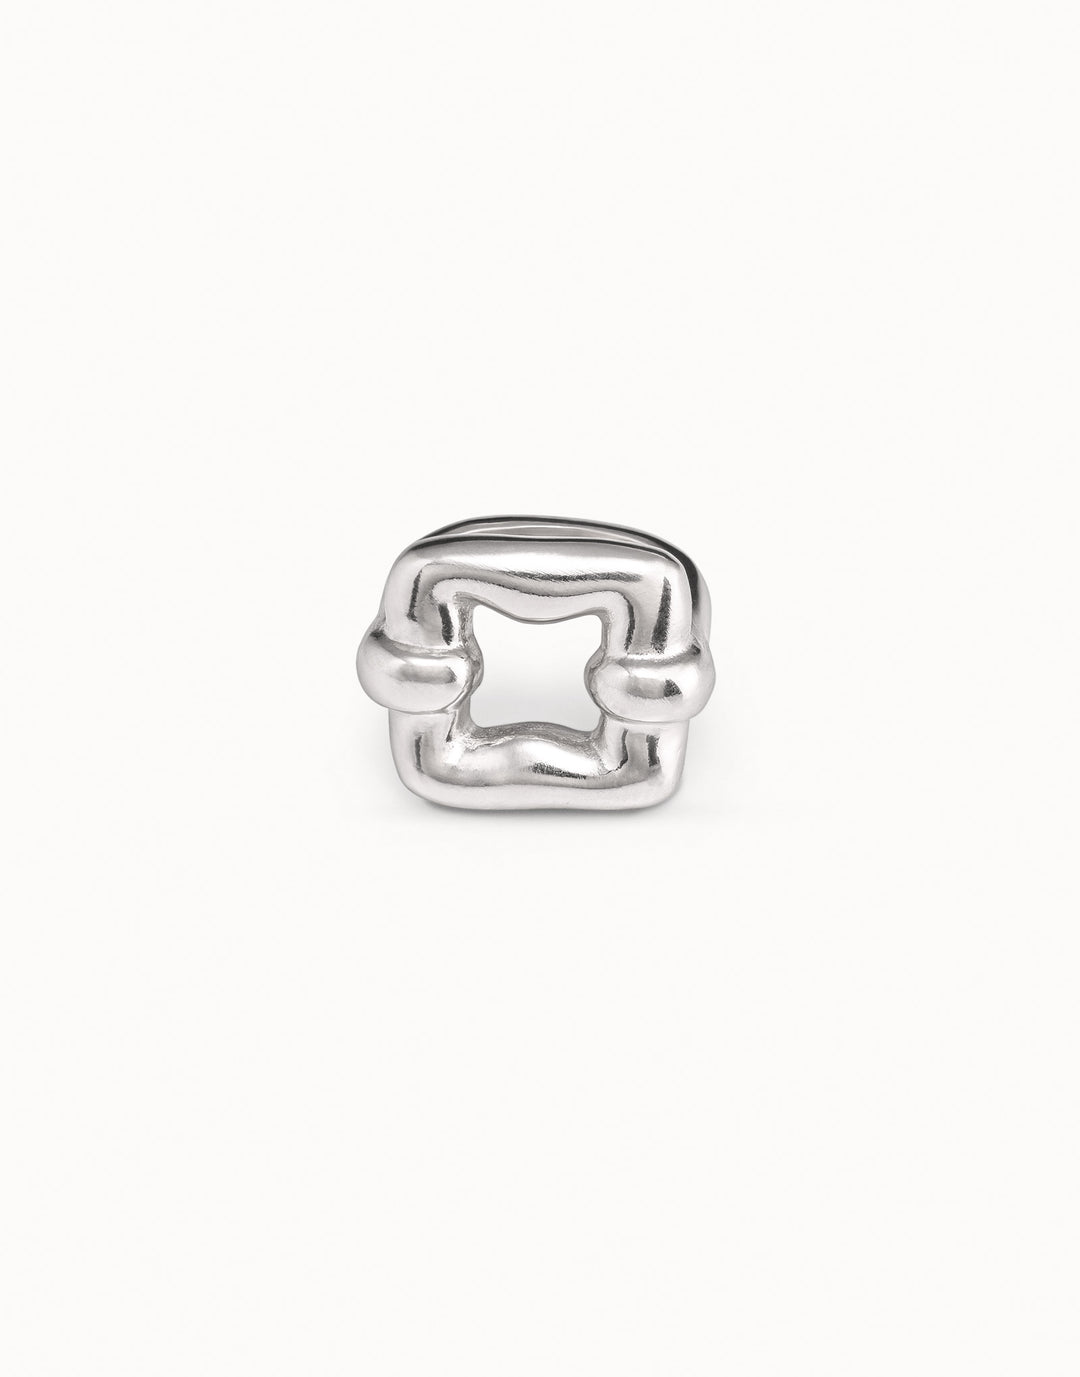 FEMME FATALE RING - SILVER - Kingfisher Road - Online Boutique